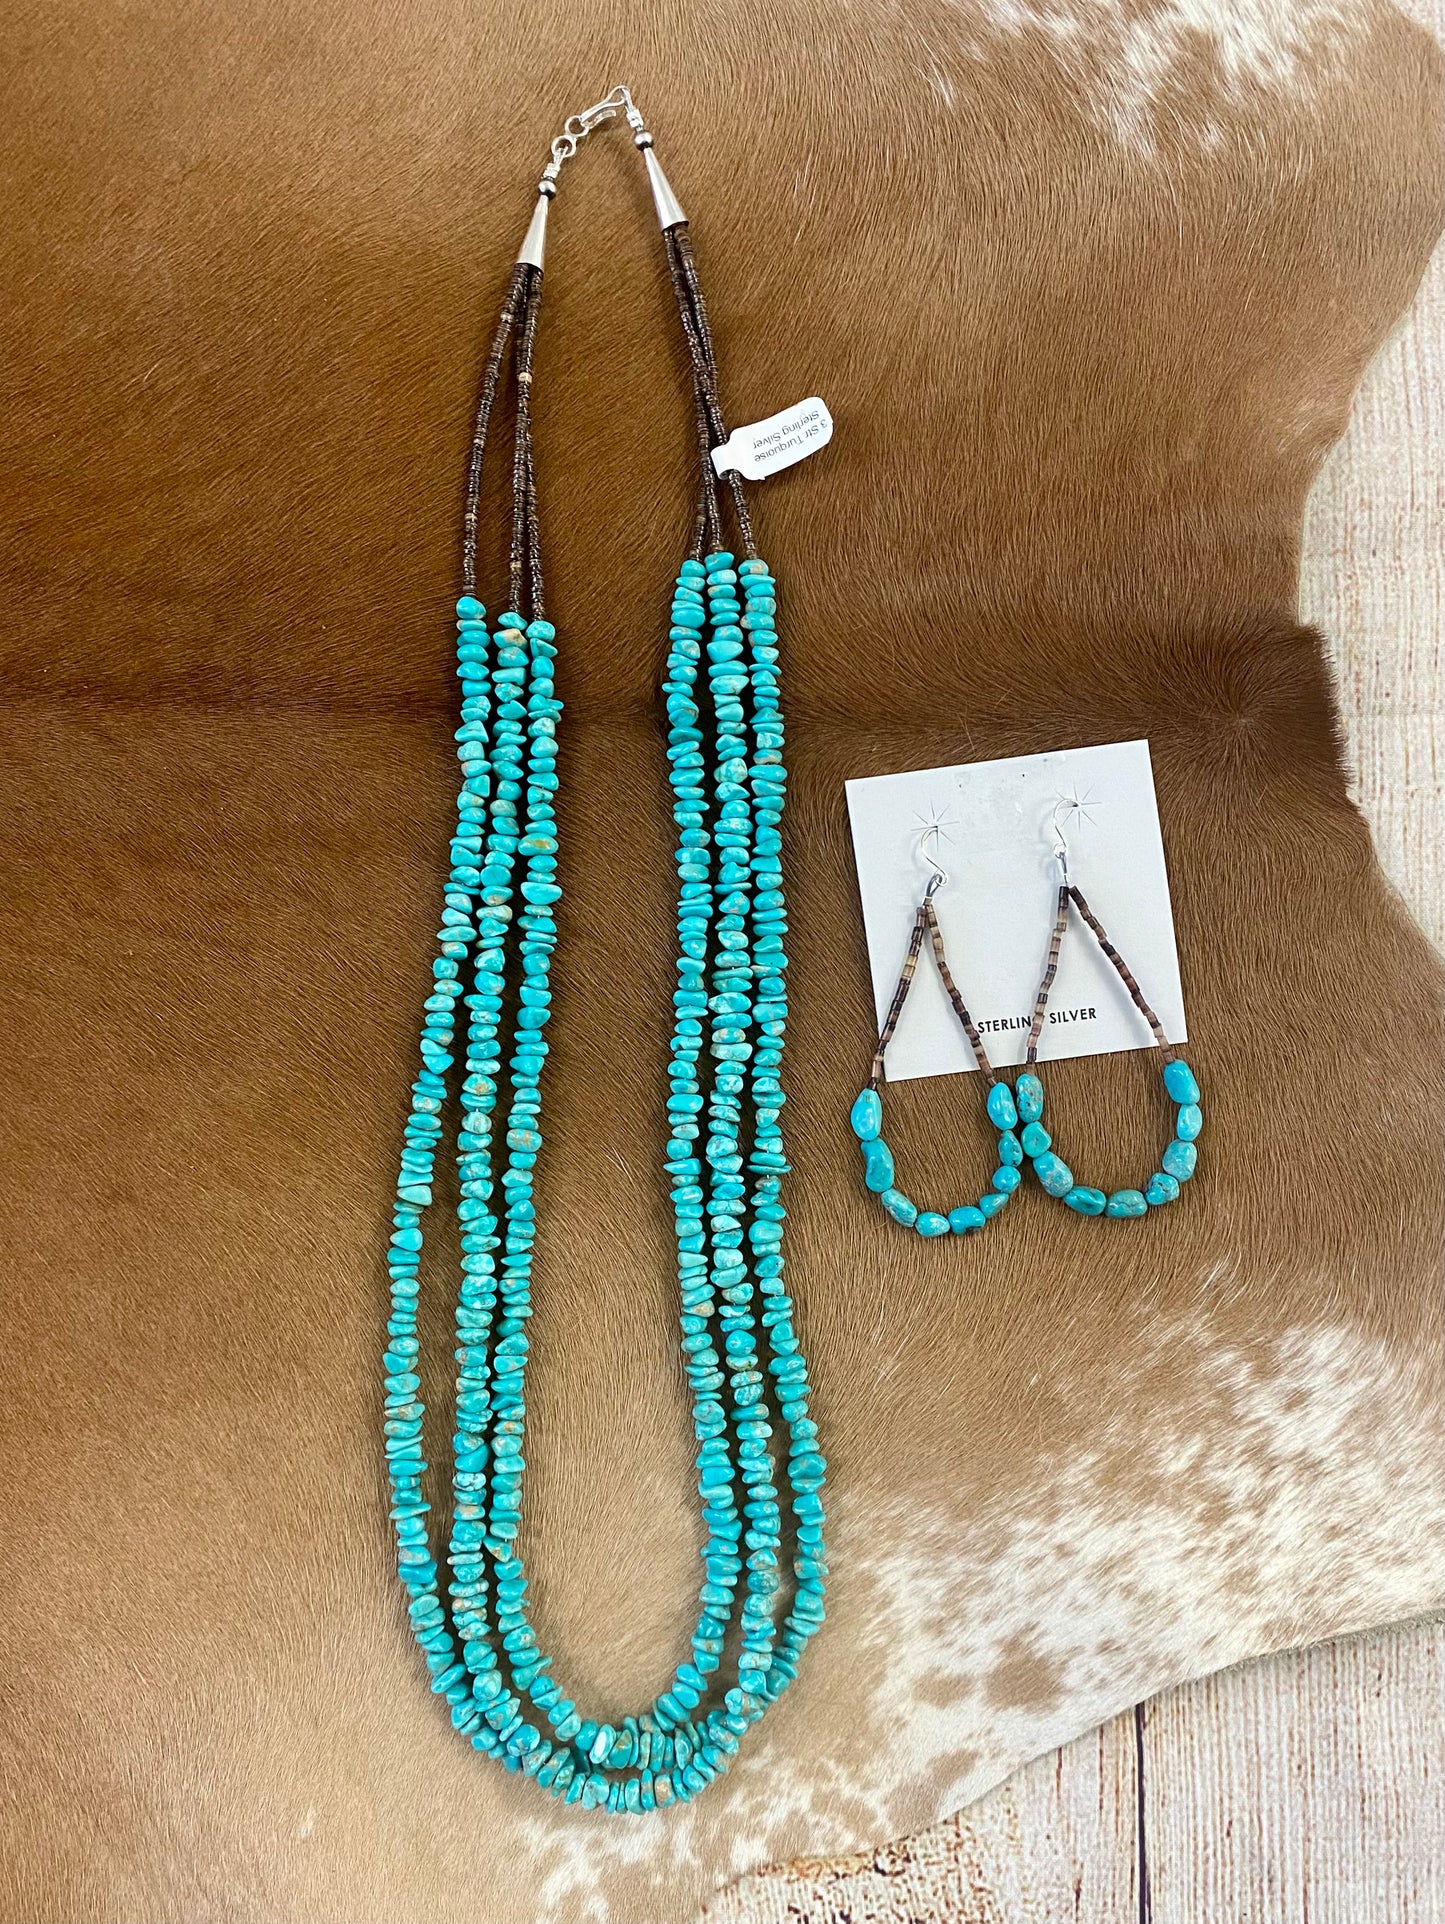 Beautiful Heshie Native American-made teardrop drop hook earrings with turquoise. The ideal jewelry item to give as a present or to keep for yourself! These are light and straightforward while still being elegant. The perfect turquoise teardrop earrings for anyone's jewelry collection!  Size: 3” inch length   Stone: Turquoise 